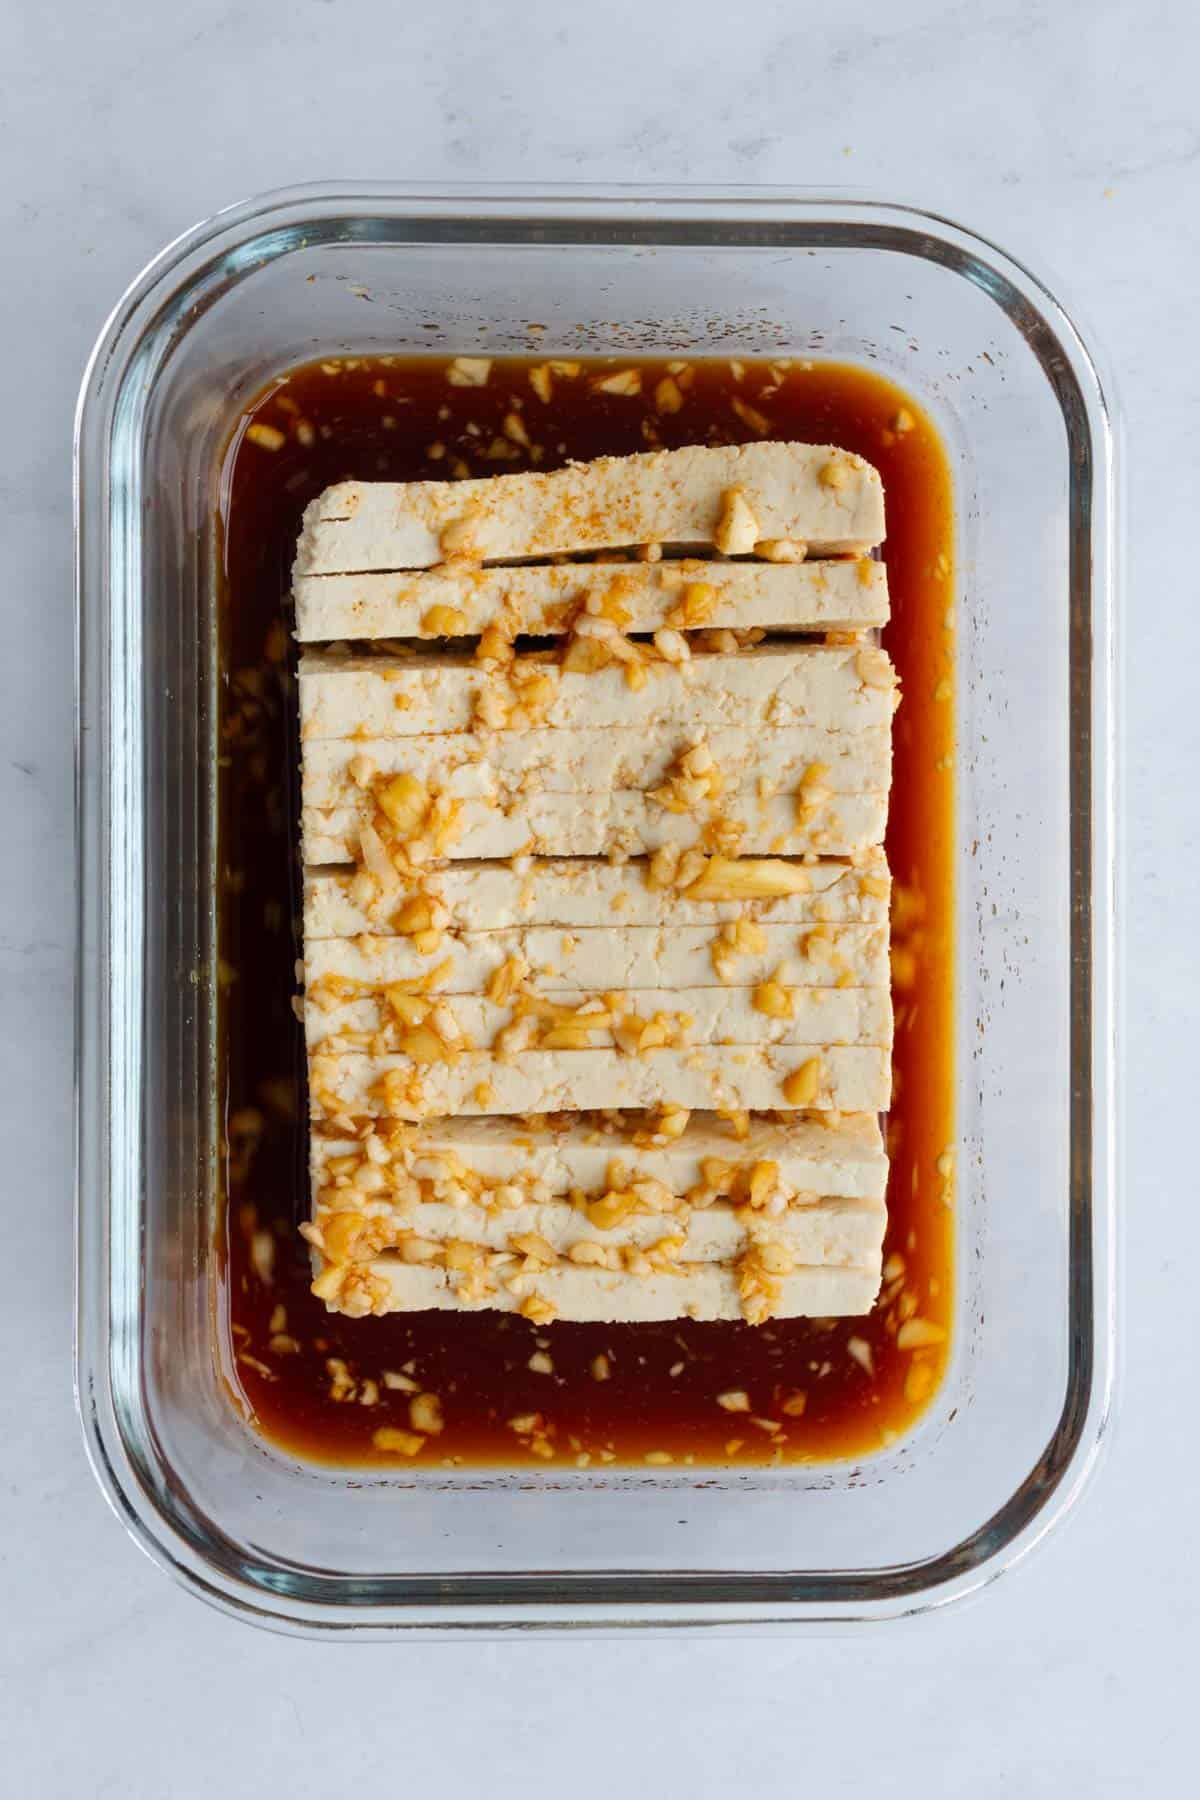 One sliced block tofu in a maple soy marinade in a glass container.